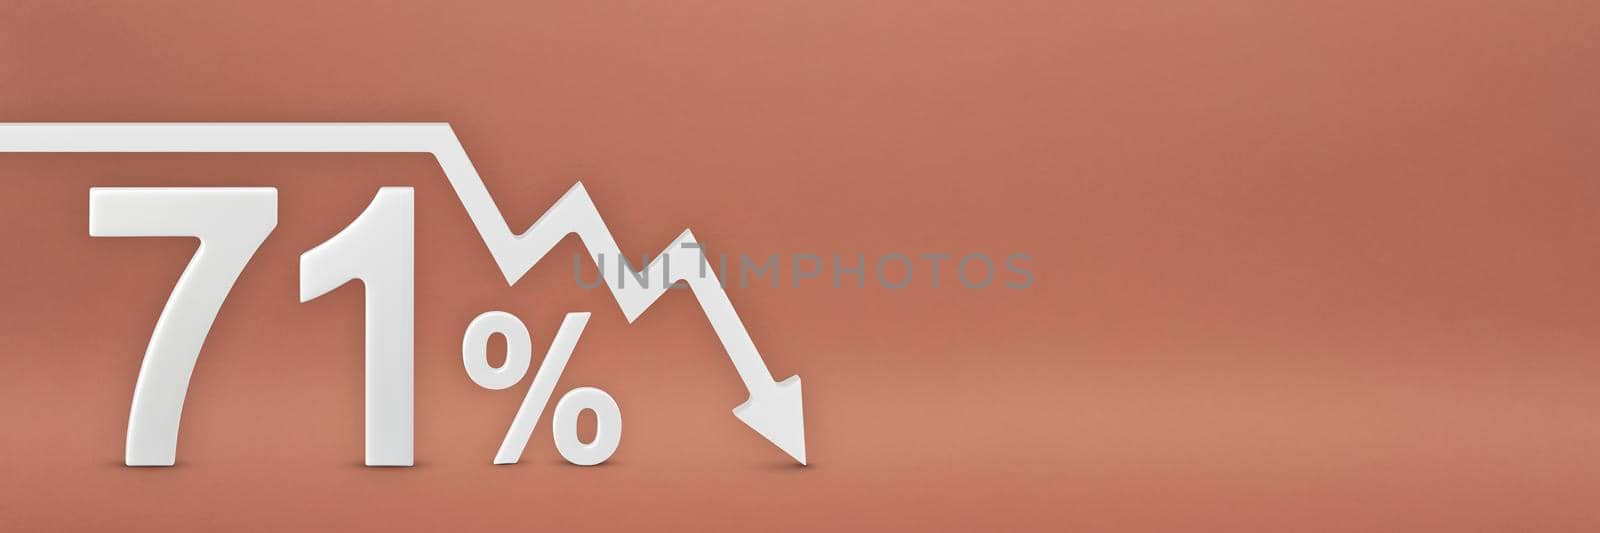 seventy-one percent, the arrow on the graph is pointing down. Stock market crash, bear market, inflation.Economic collapse, collapse of stocks.3d banner,71 percent discount sign on a red background. by SERSOL